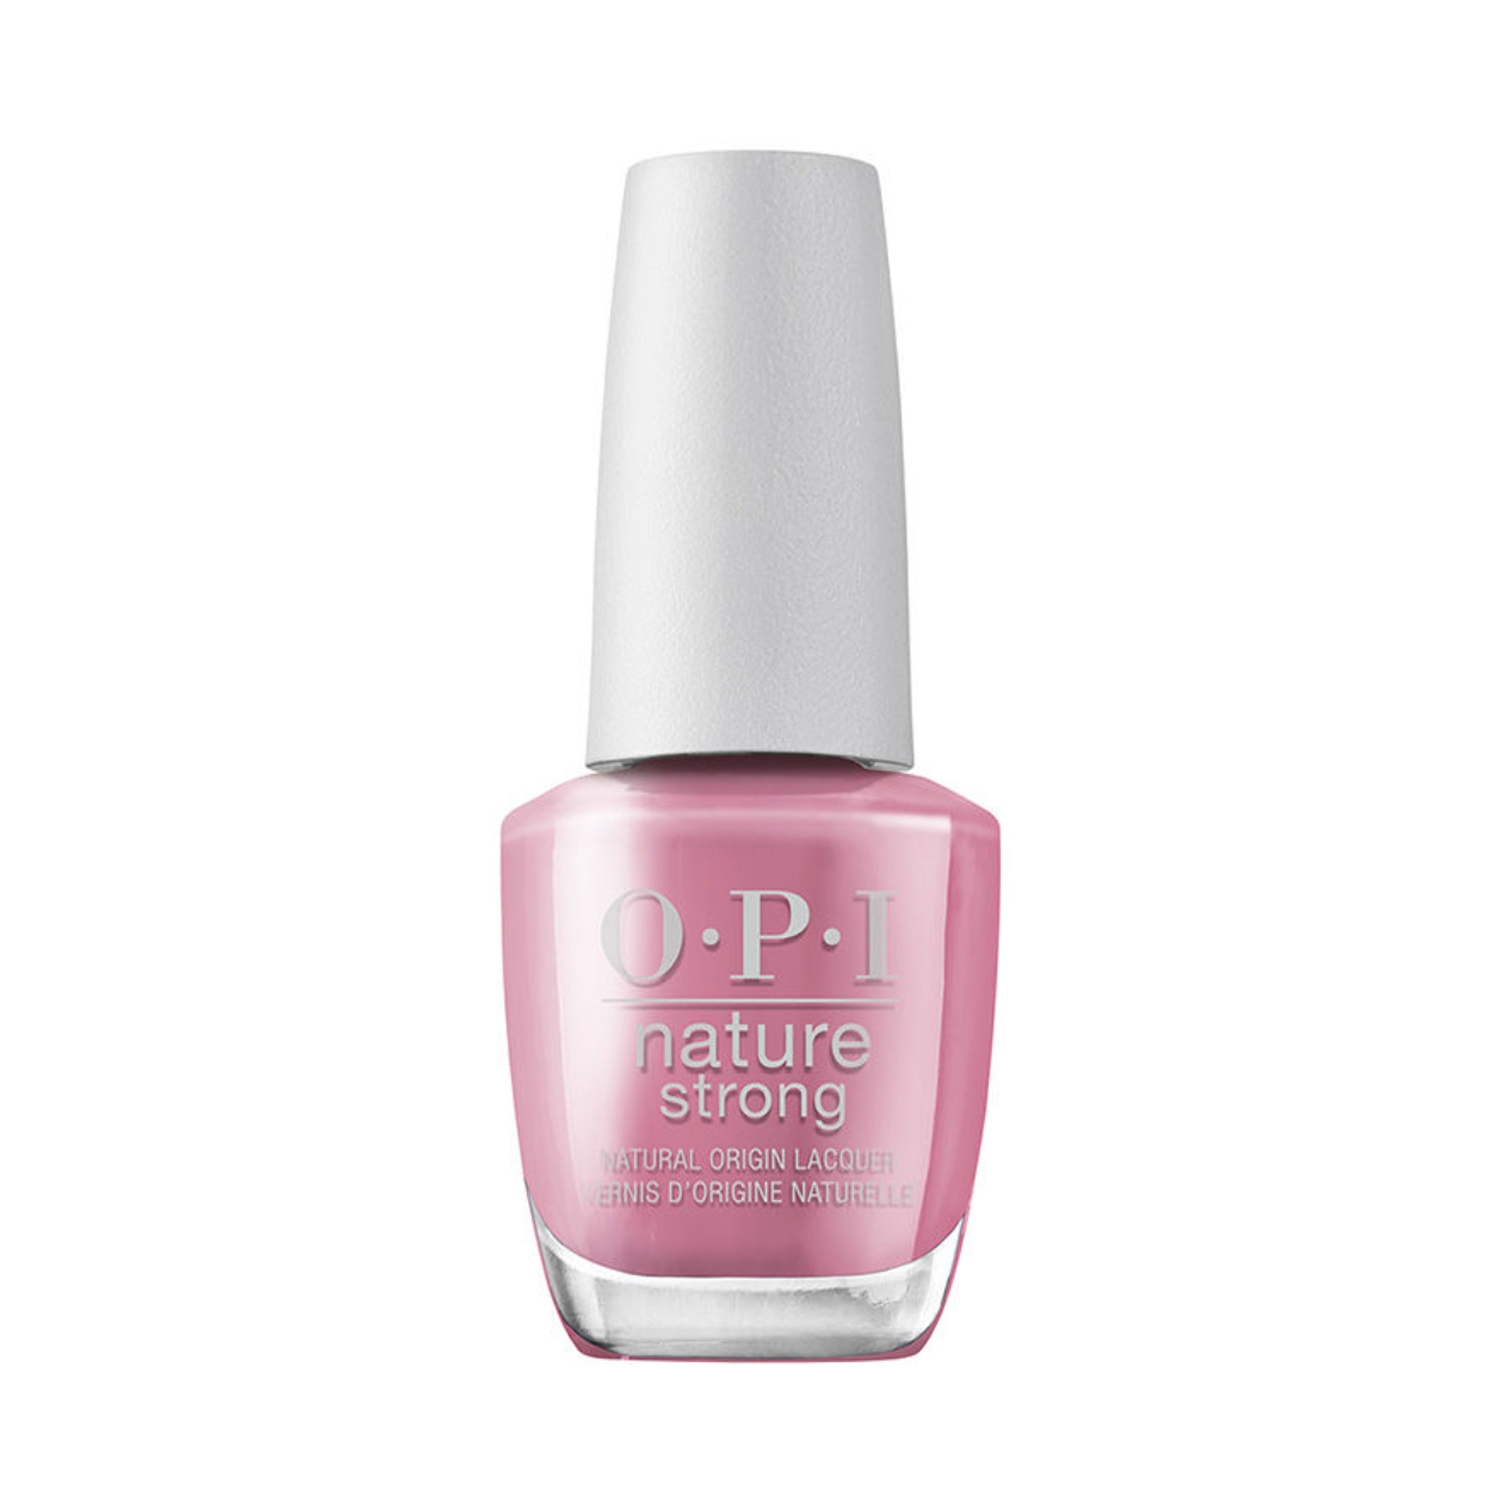 O.P.I | O.P.I Nature Strong Nail Paint - Knowledge Is Flower (15ml)